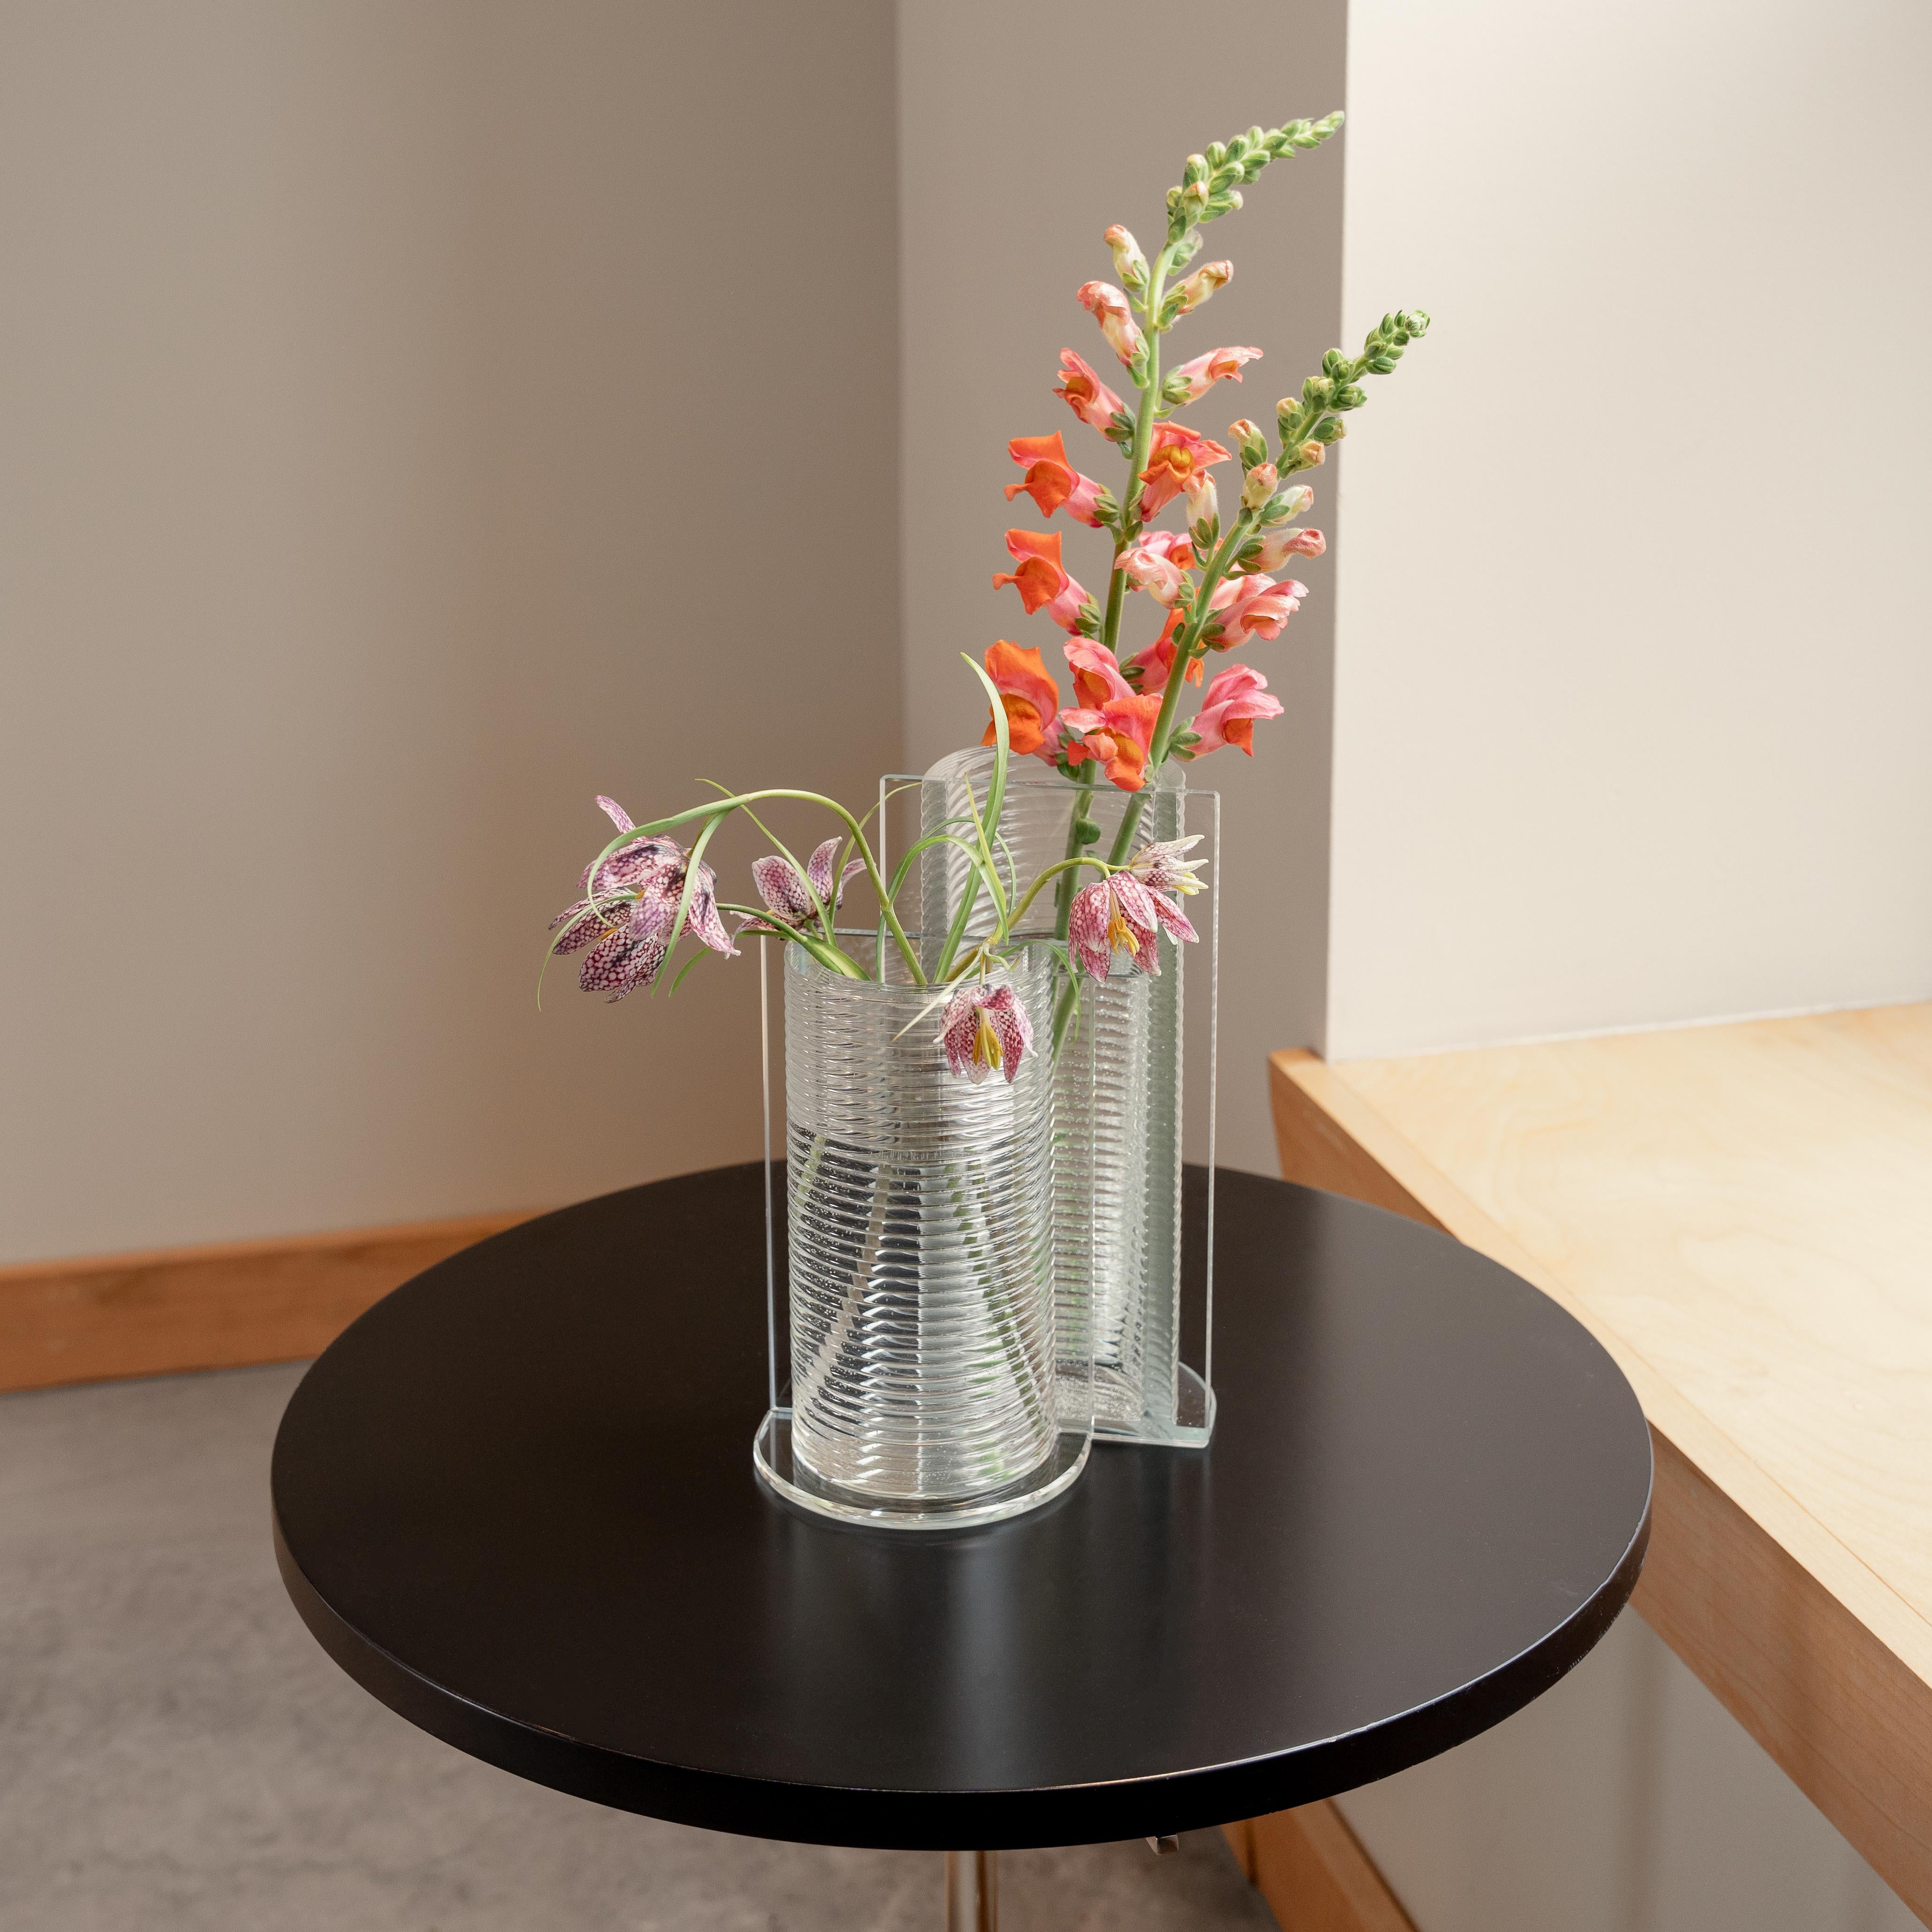 Made using Evenline's one-of-a-kind molten glass 3D printer, Bisect is a unique and recognizable silhouette to brighten up your home and bring your favorite flowers to life. Bisect is designed to be able to shine as a single vase, but also pairs